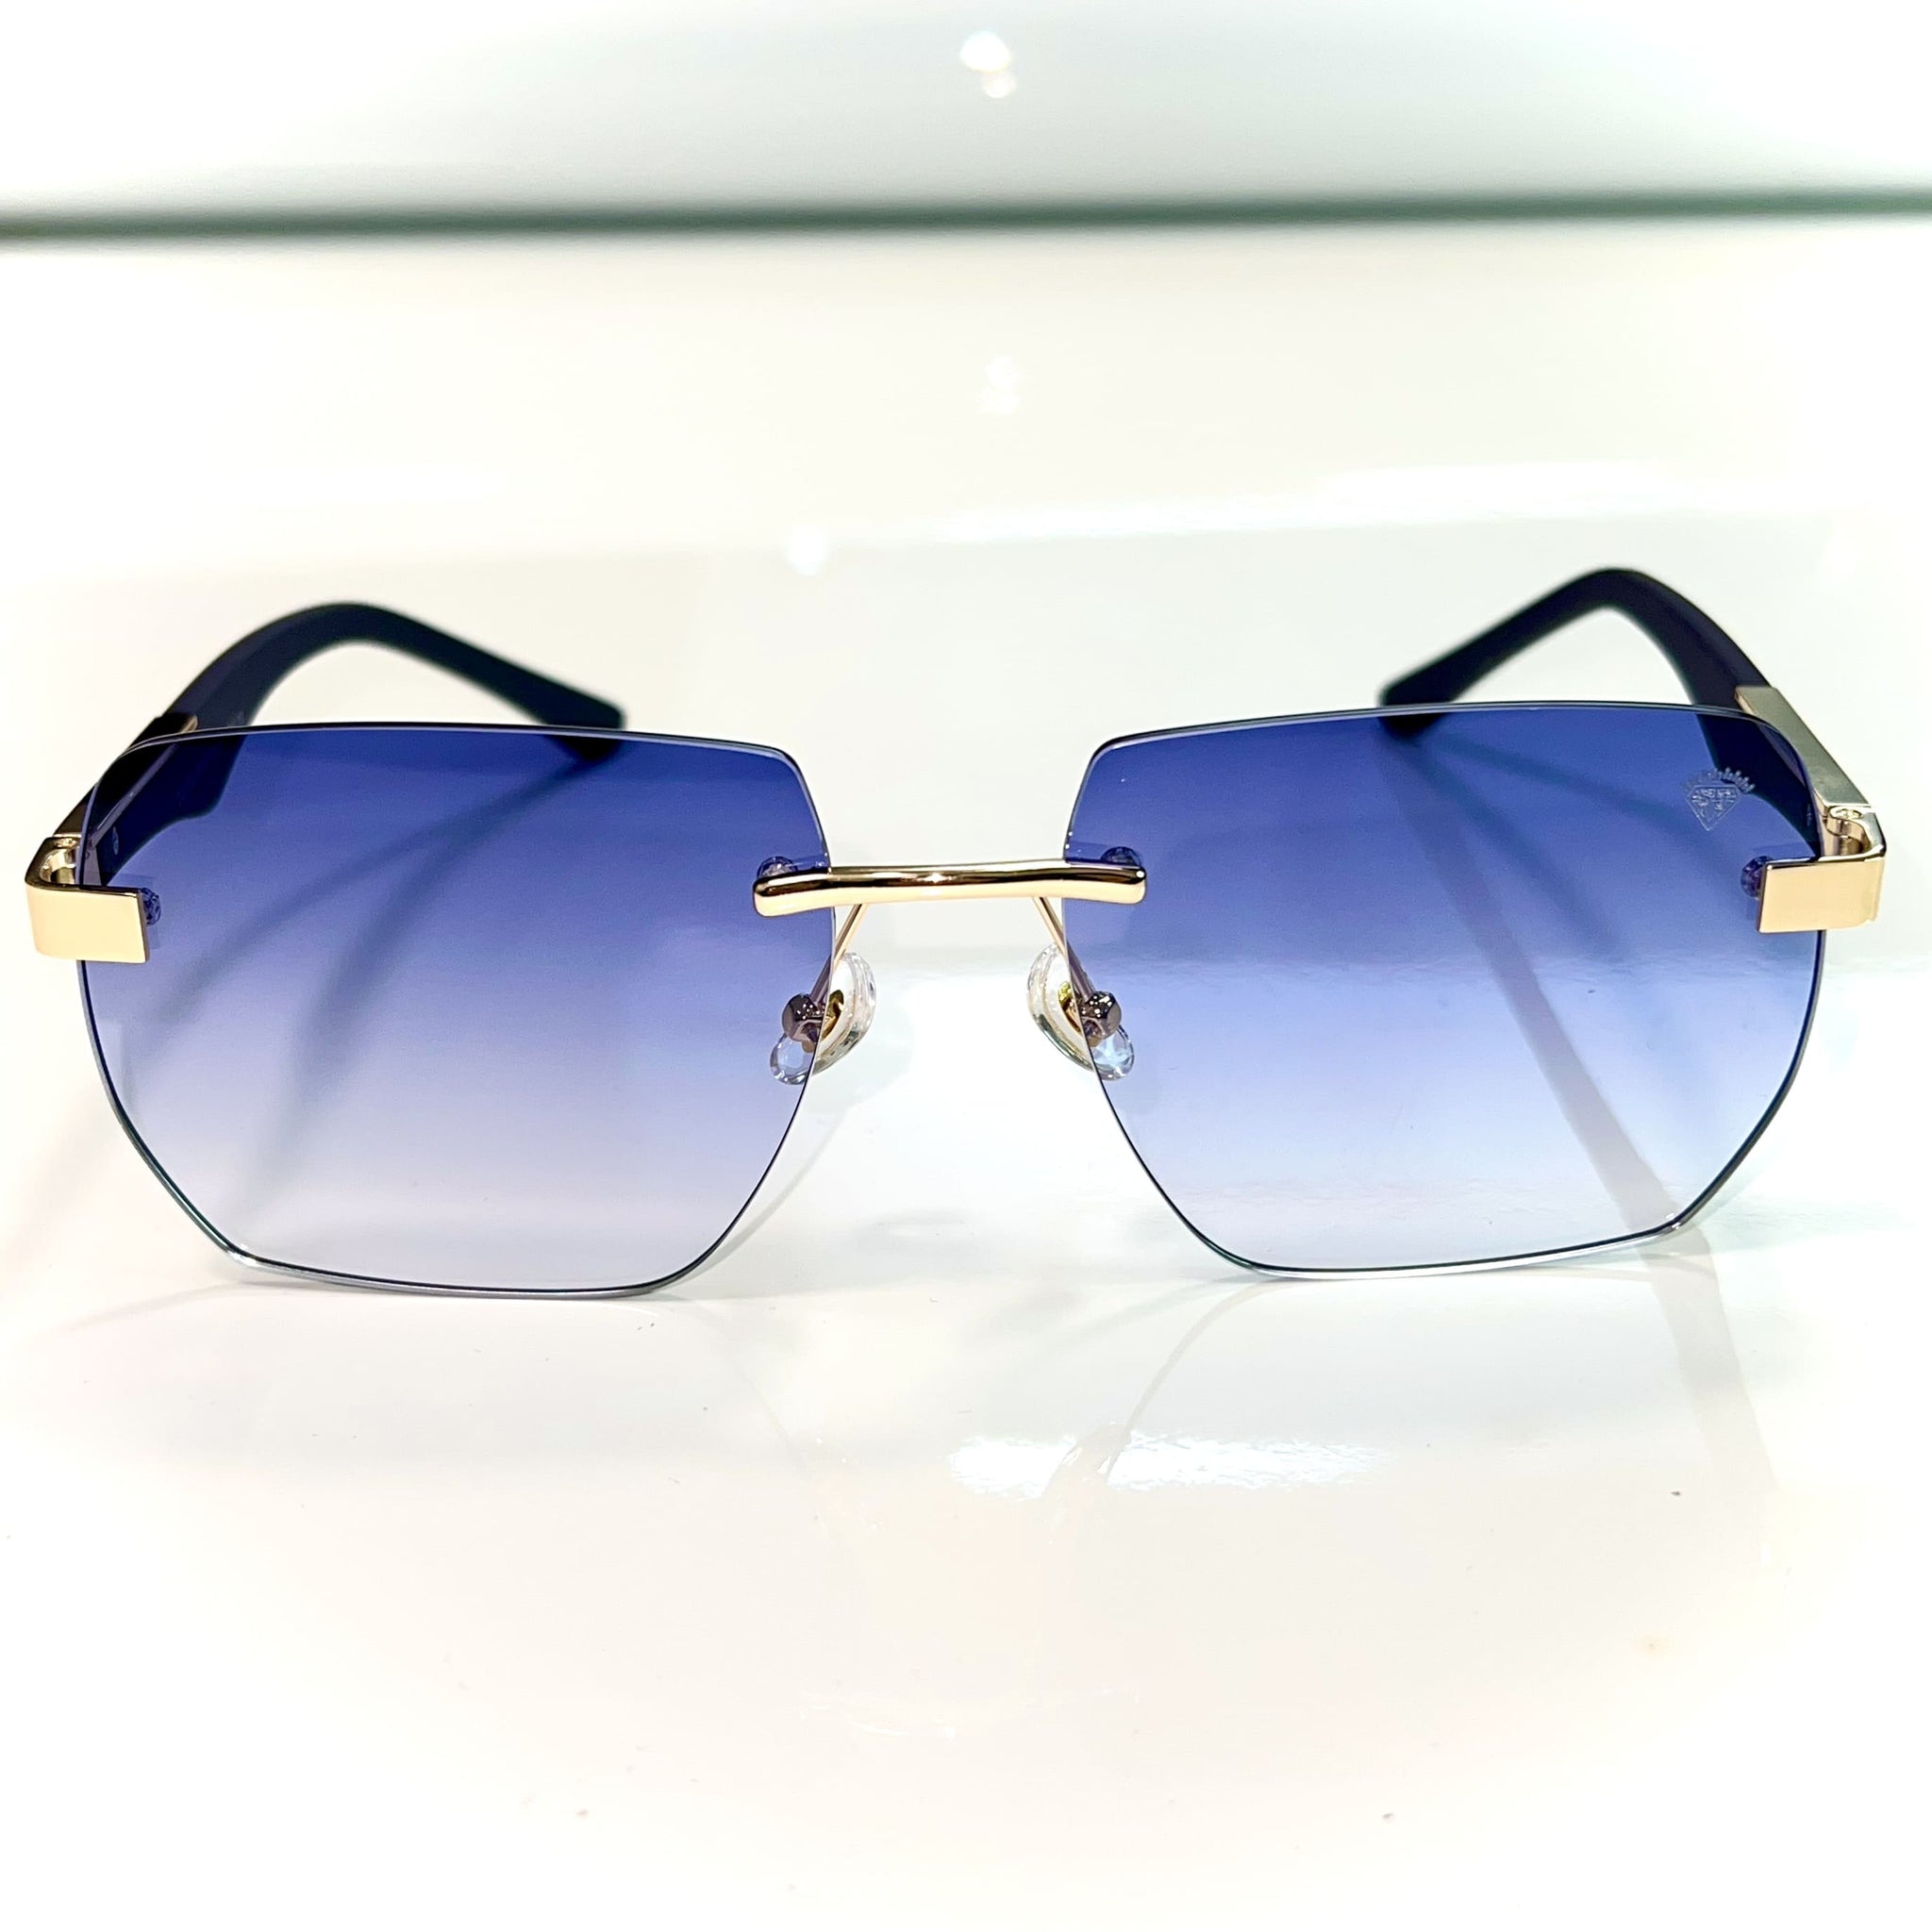 Dubai Glasses - 14 carat gold plated / Silicon side - Blue Shade - Sehgal Glasses